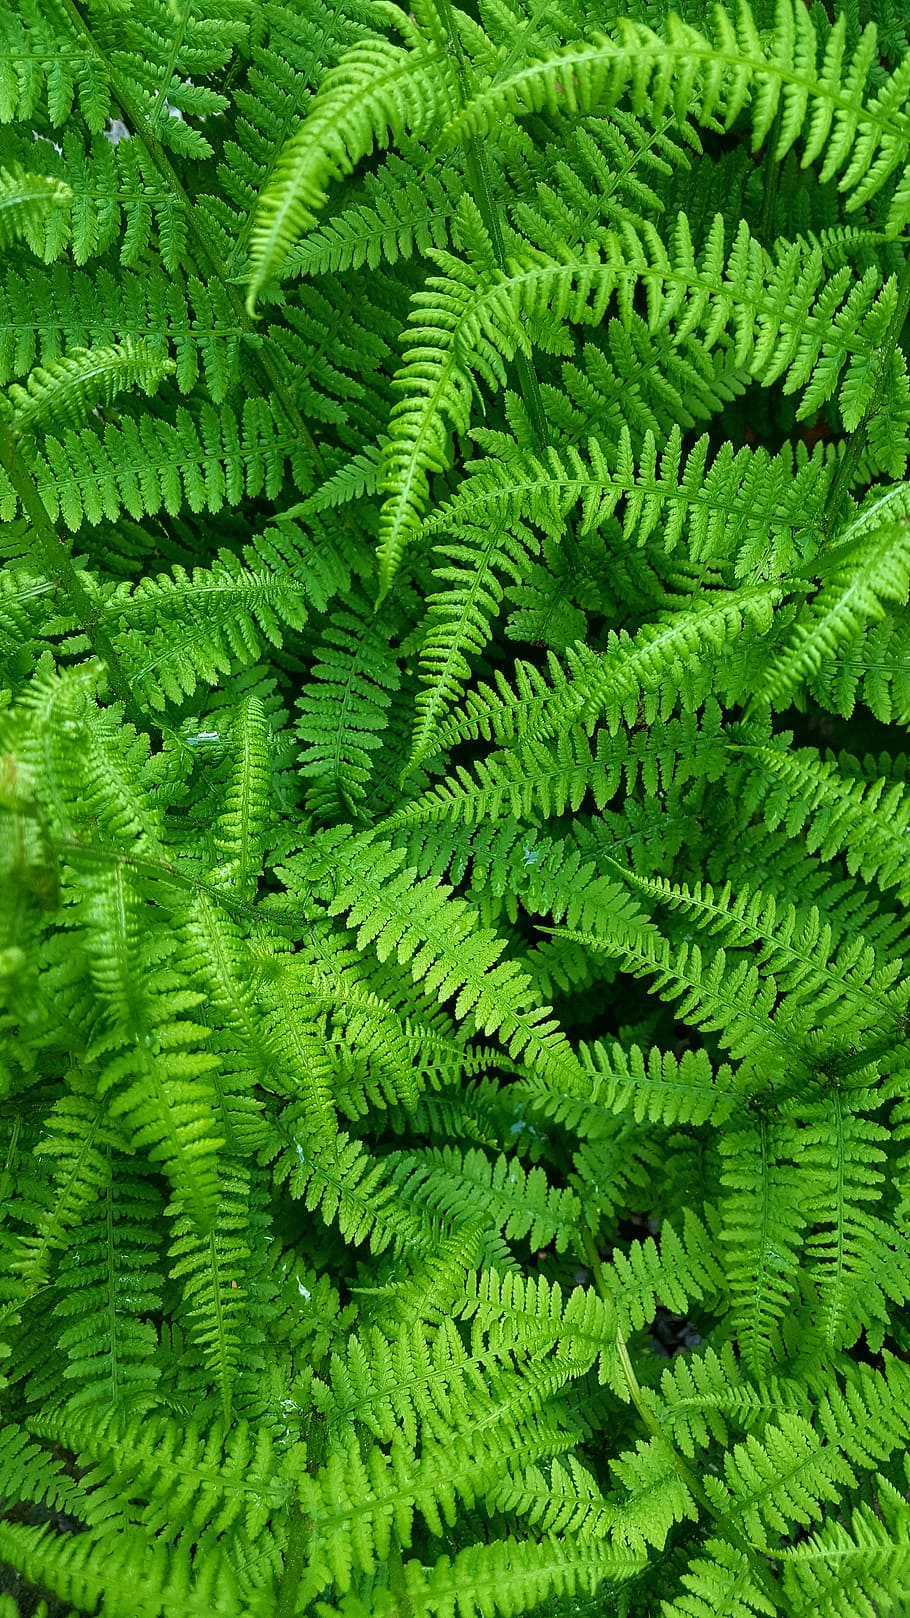 leaf, nature, fern, plant, growth, green color, backgrounds, full frame, plant part, close-up